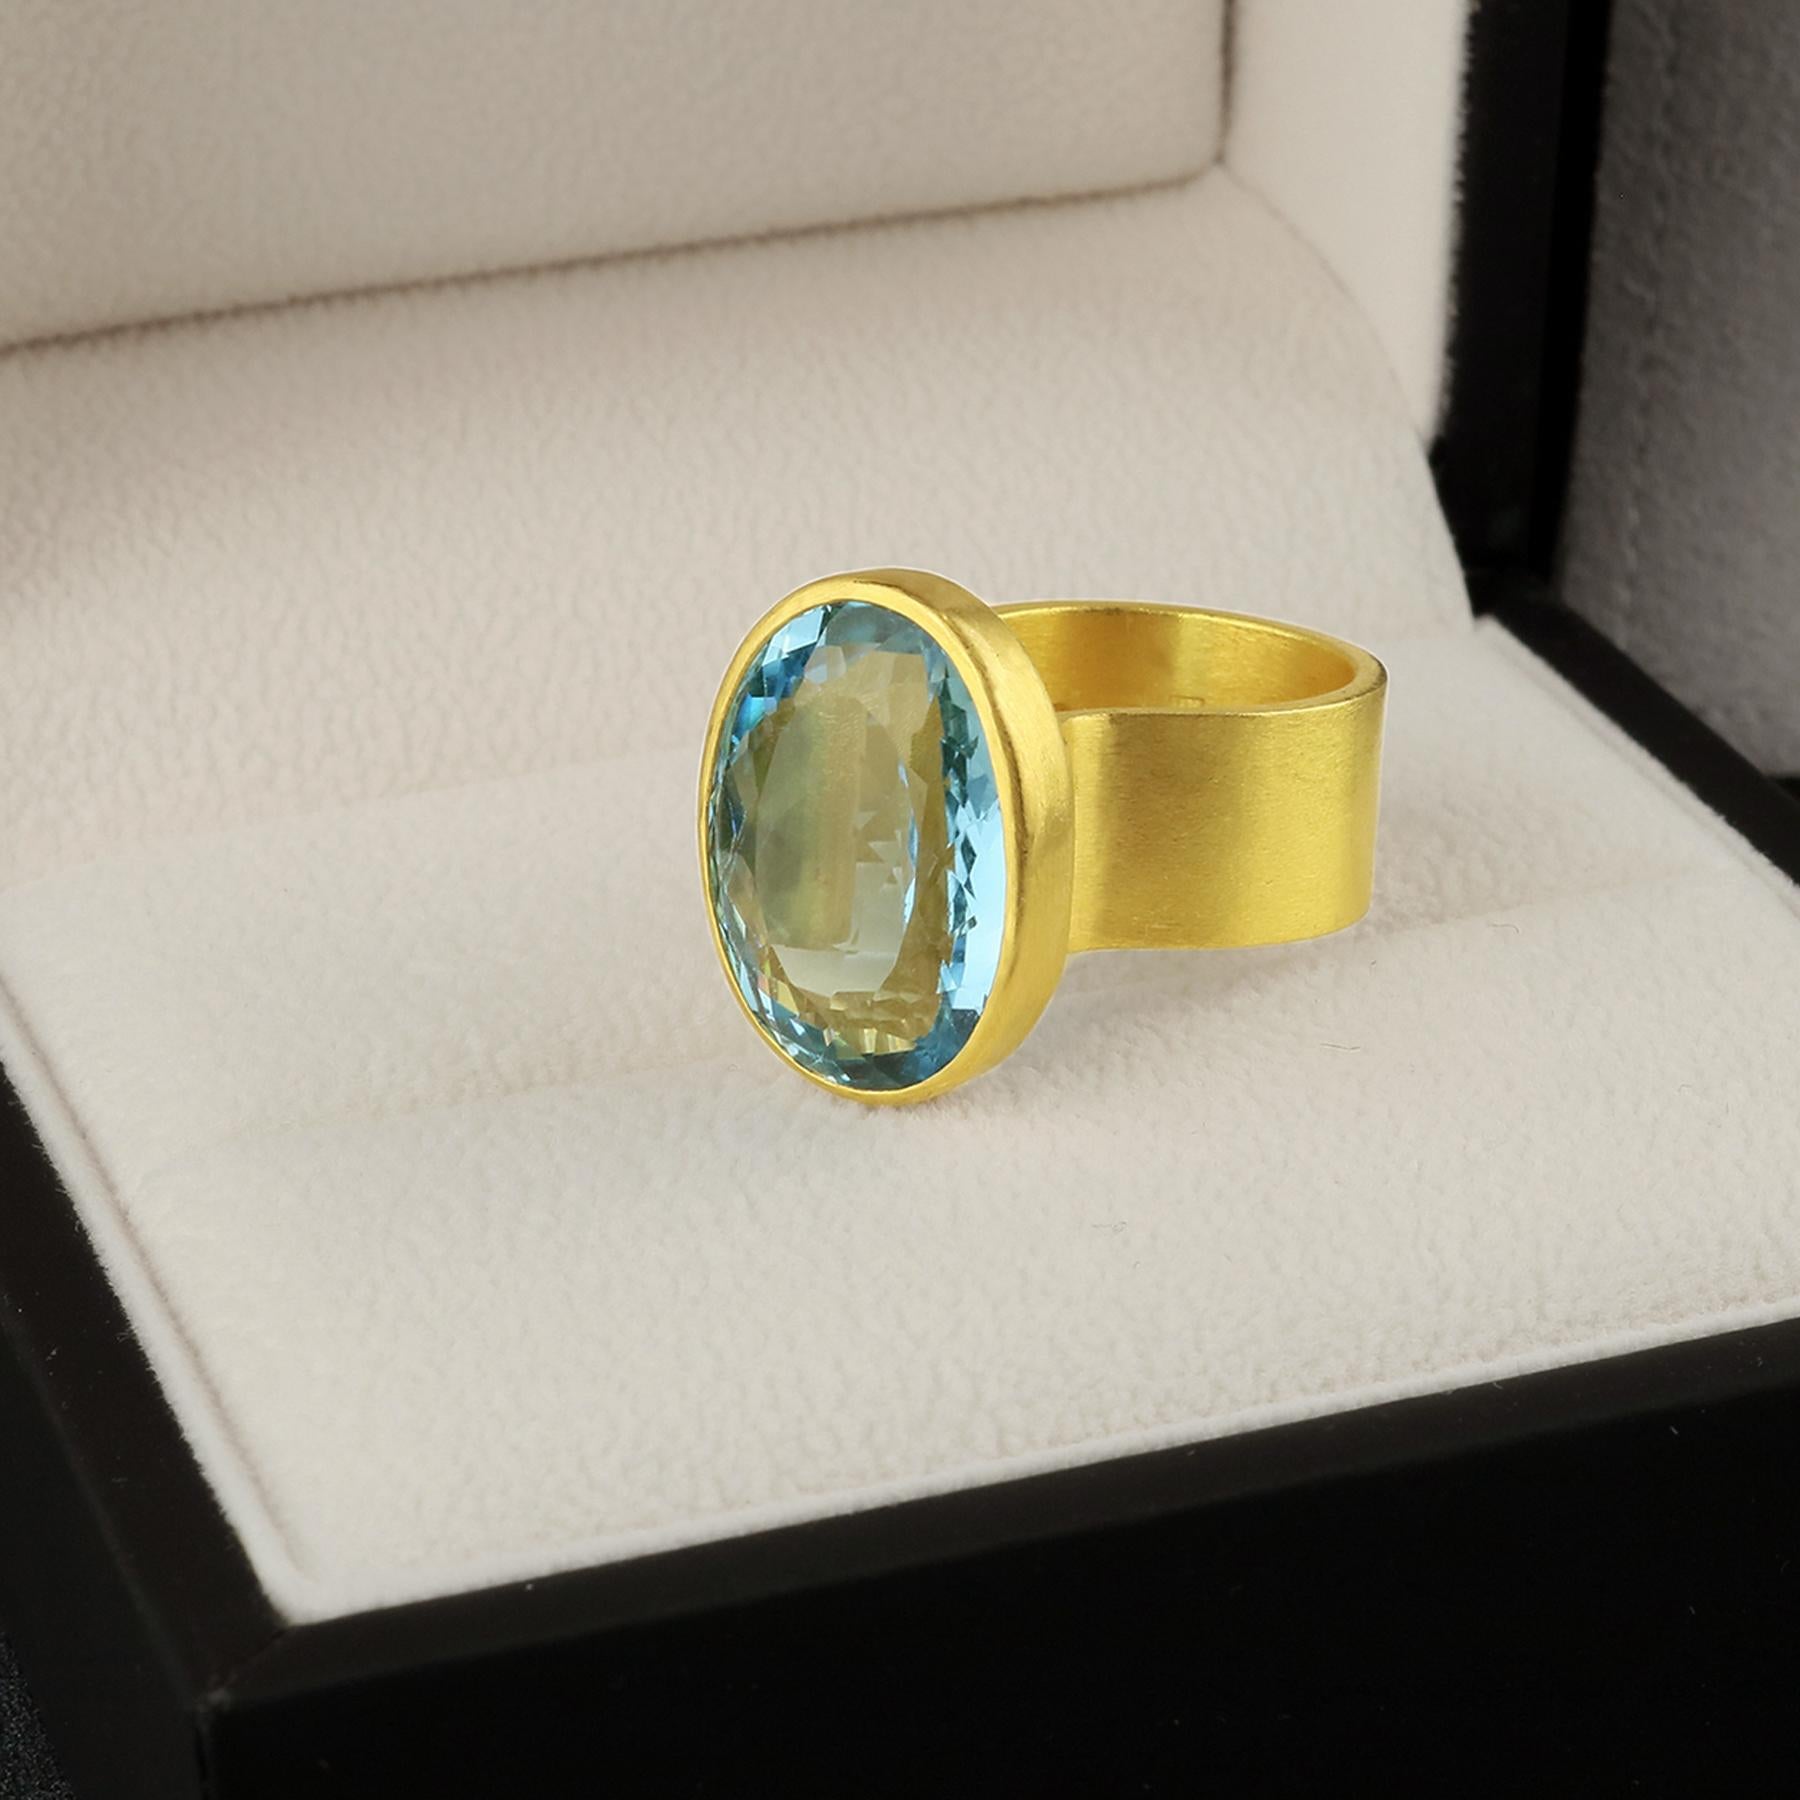 PHILIPPE SPENCER - 19.25 Ct. Oval London Blue Topaz set in backless 22K Gold setting with Solid 20K Gold Hand & Anvil Forged wide-band Statement Ring. Heavy Matte Brushed Finish. Size 5 3/4 to 6, and is in-stock and ready to ship. Our apologies in